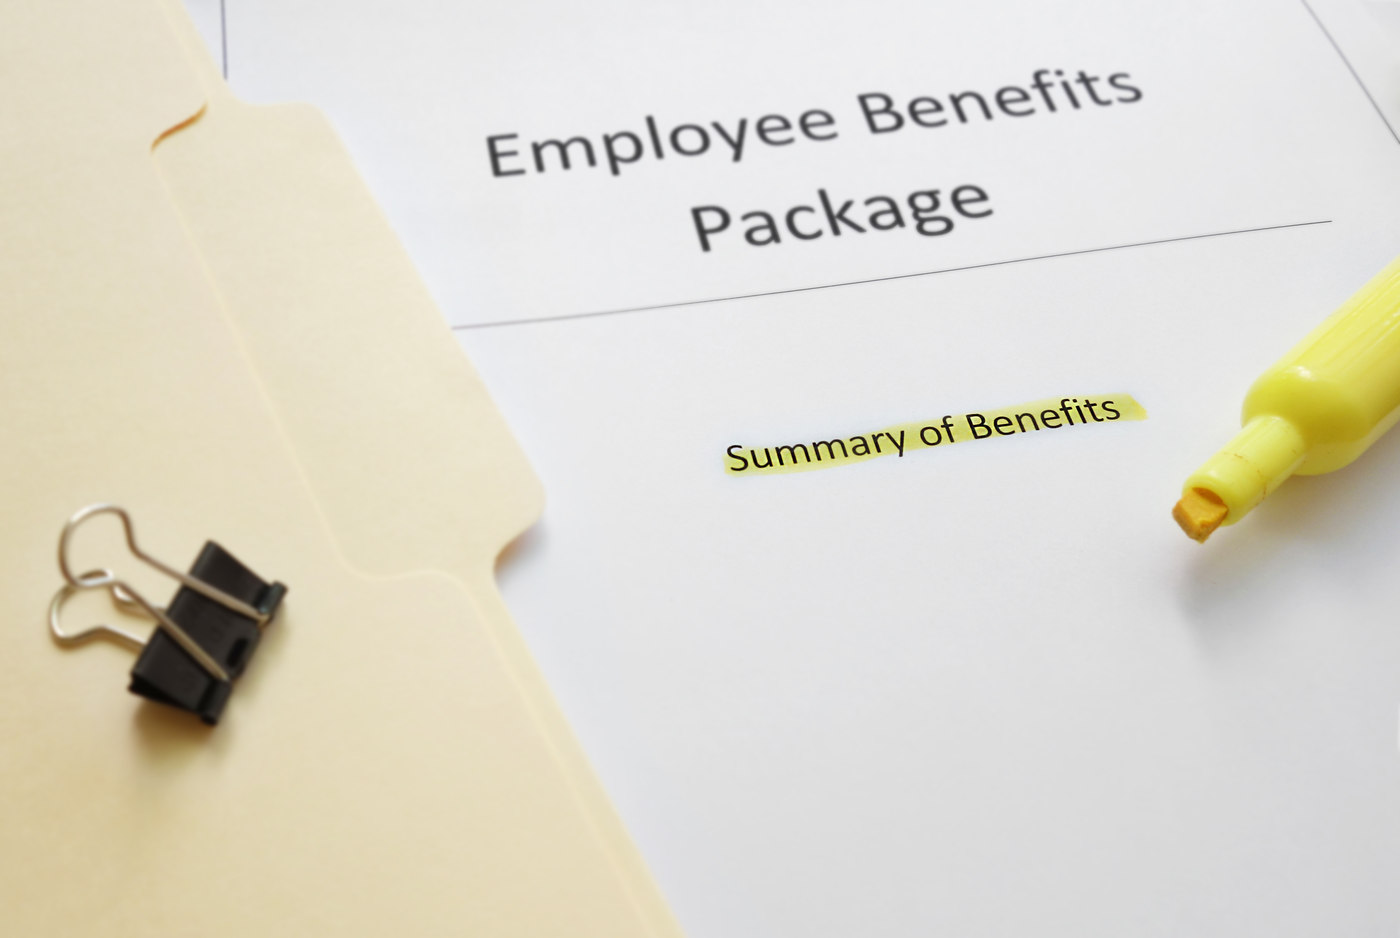 New Mexico Custom Benefits Plans - Benefits Services and Administration